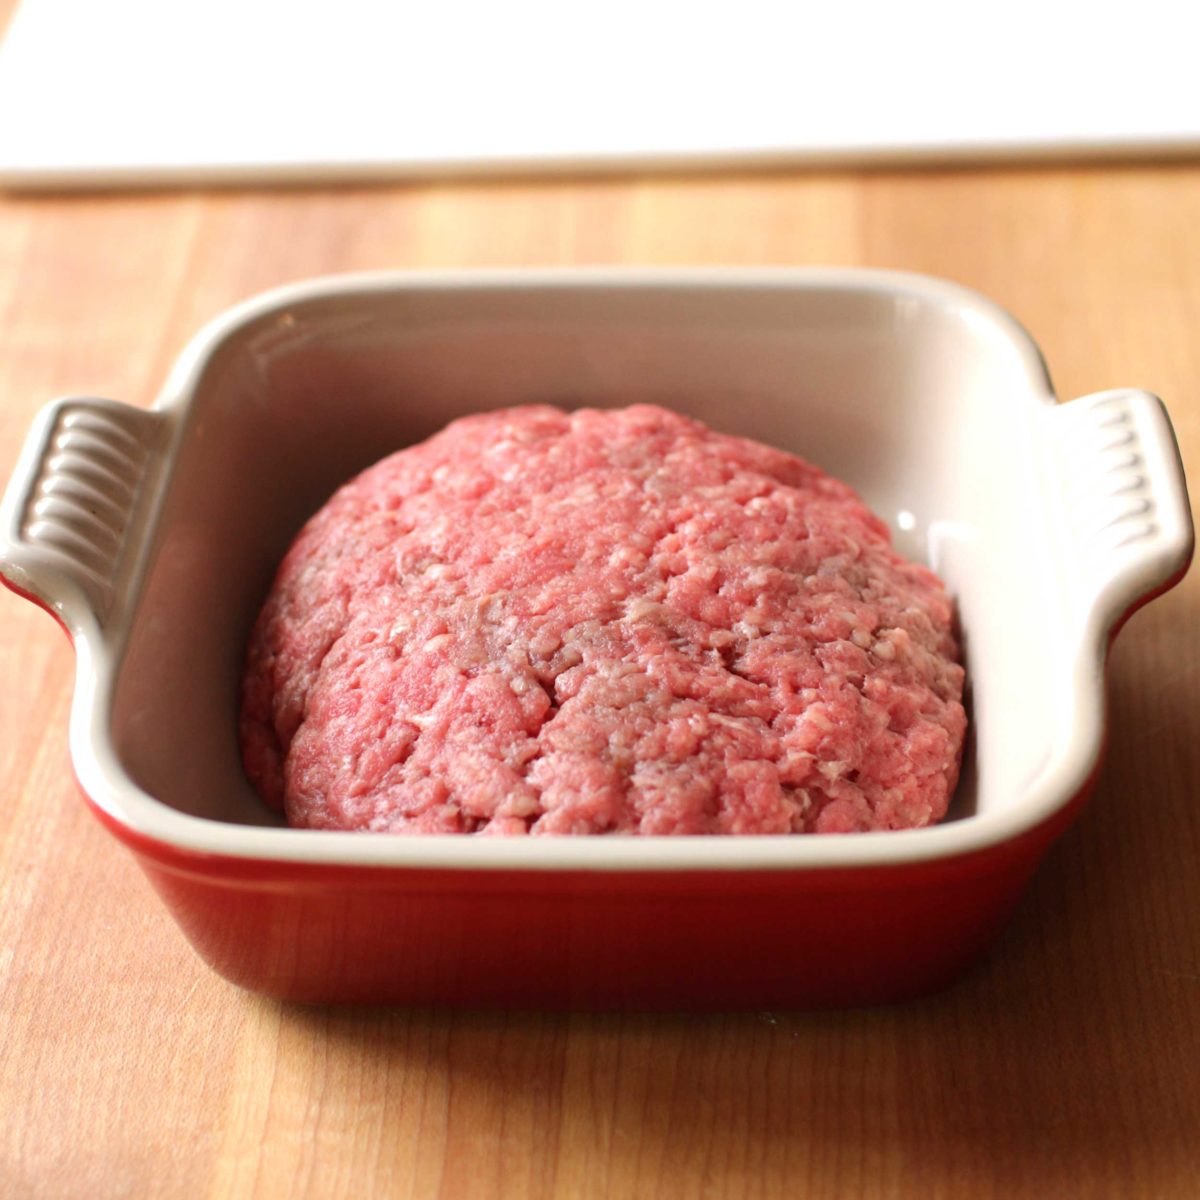 a juicy lucy burger in a small square baking dish on a wooden counter